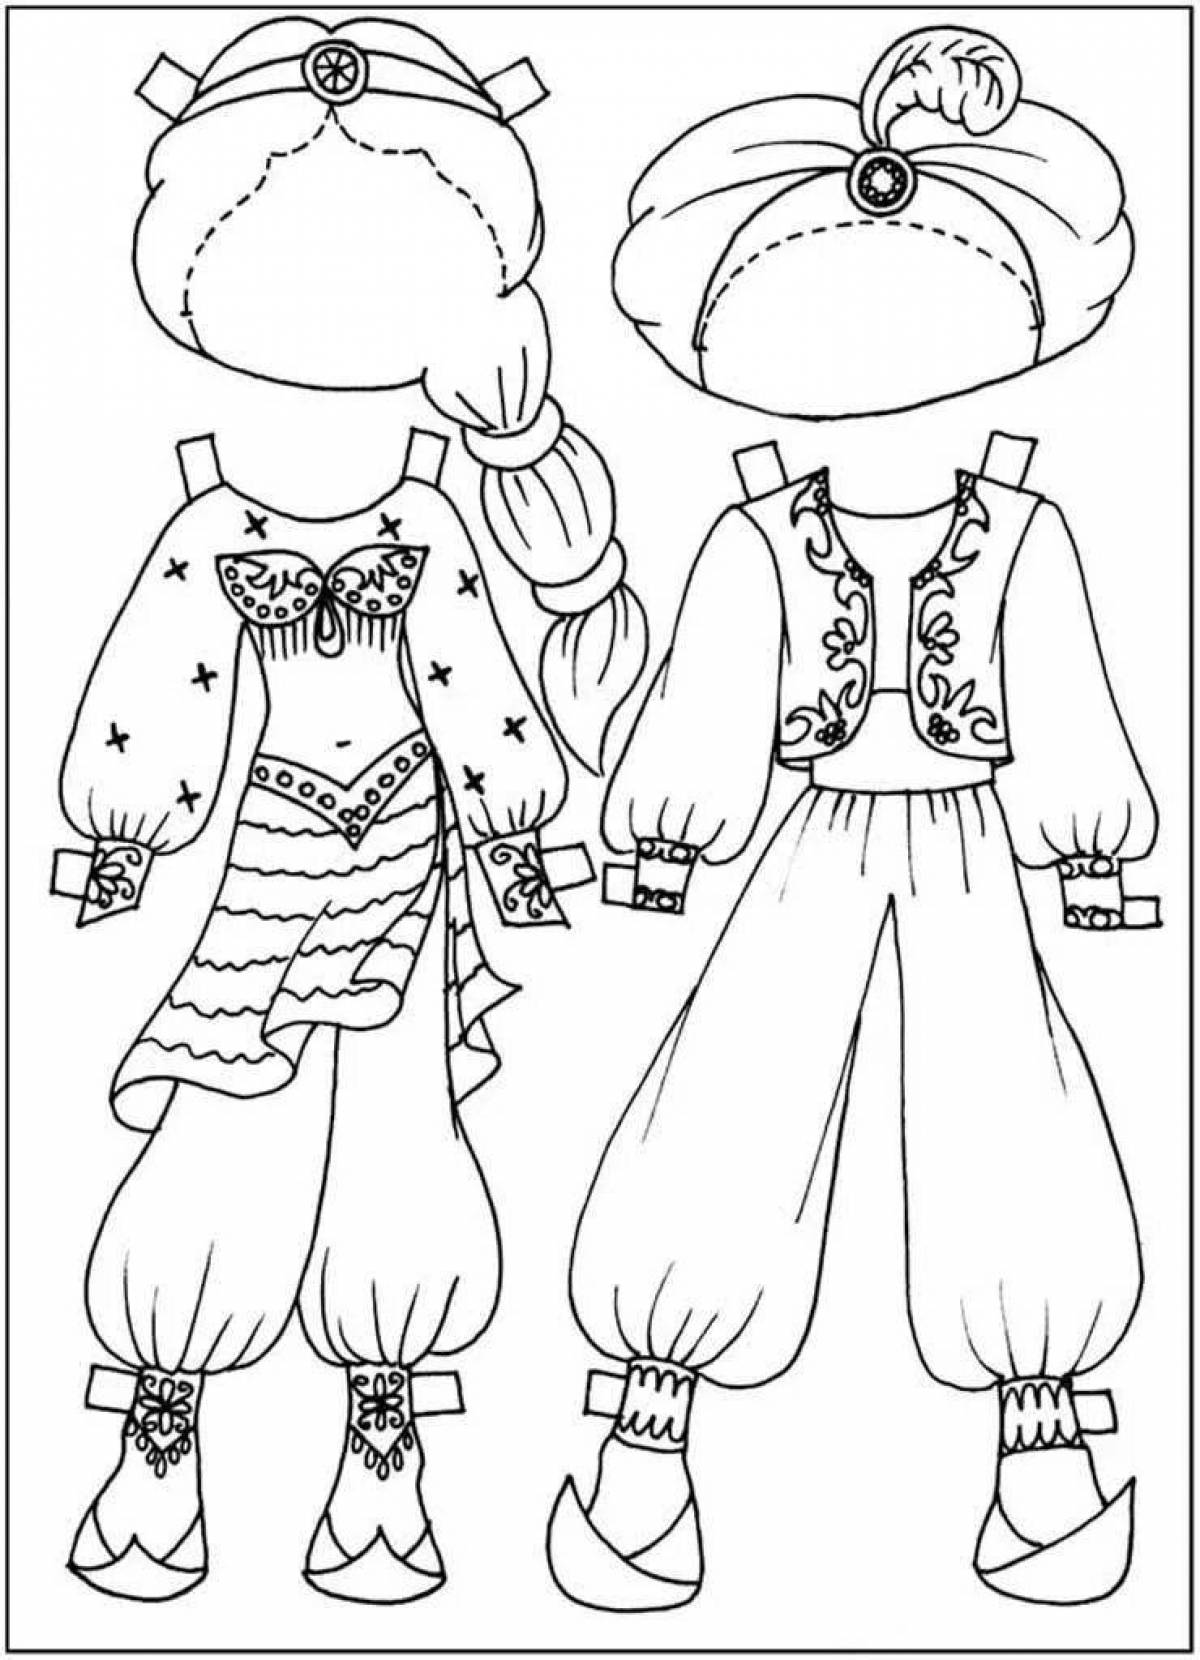 Funny costume coloring page